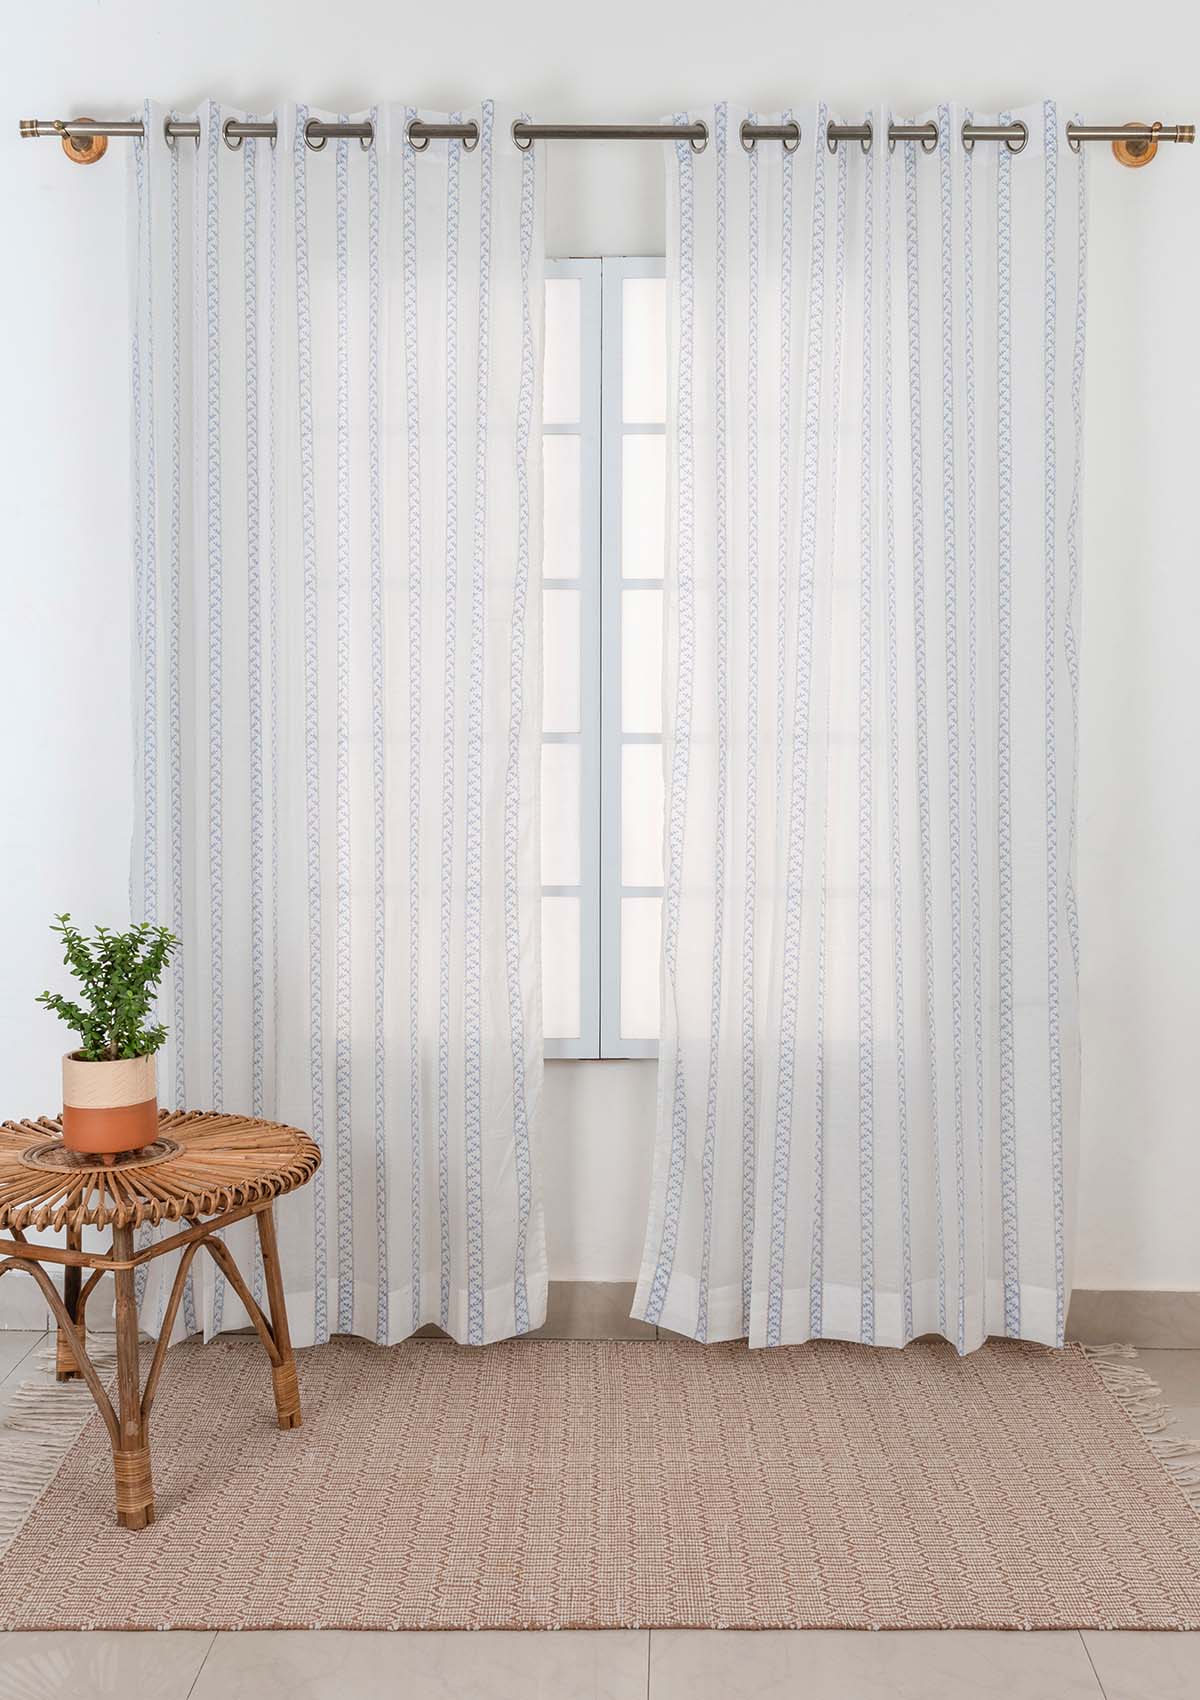 Oriental Stripes printed Sheer Curtain standard size for window and door - Powder Blue